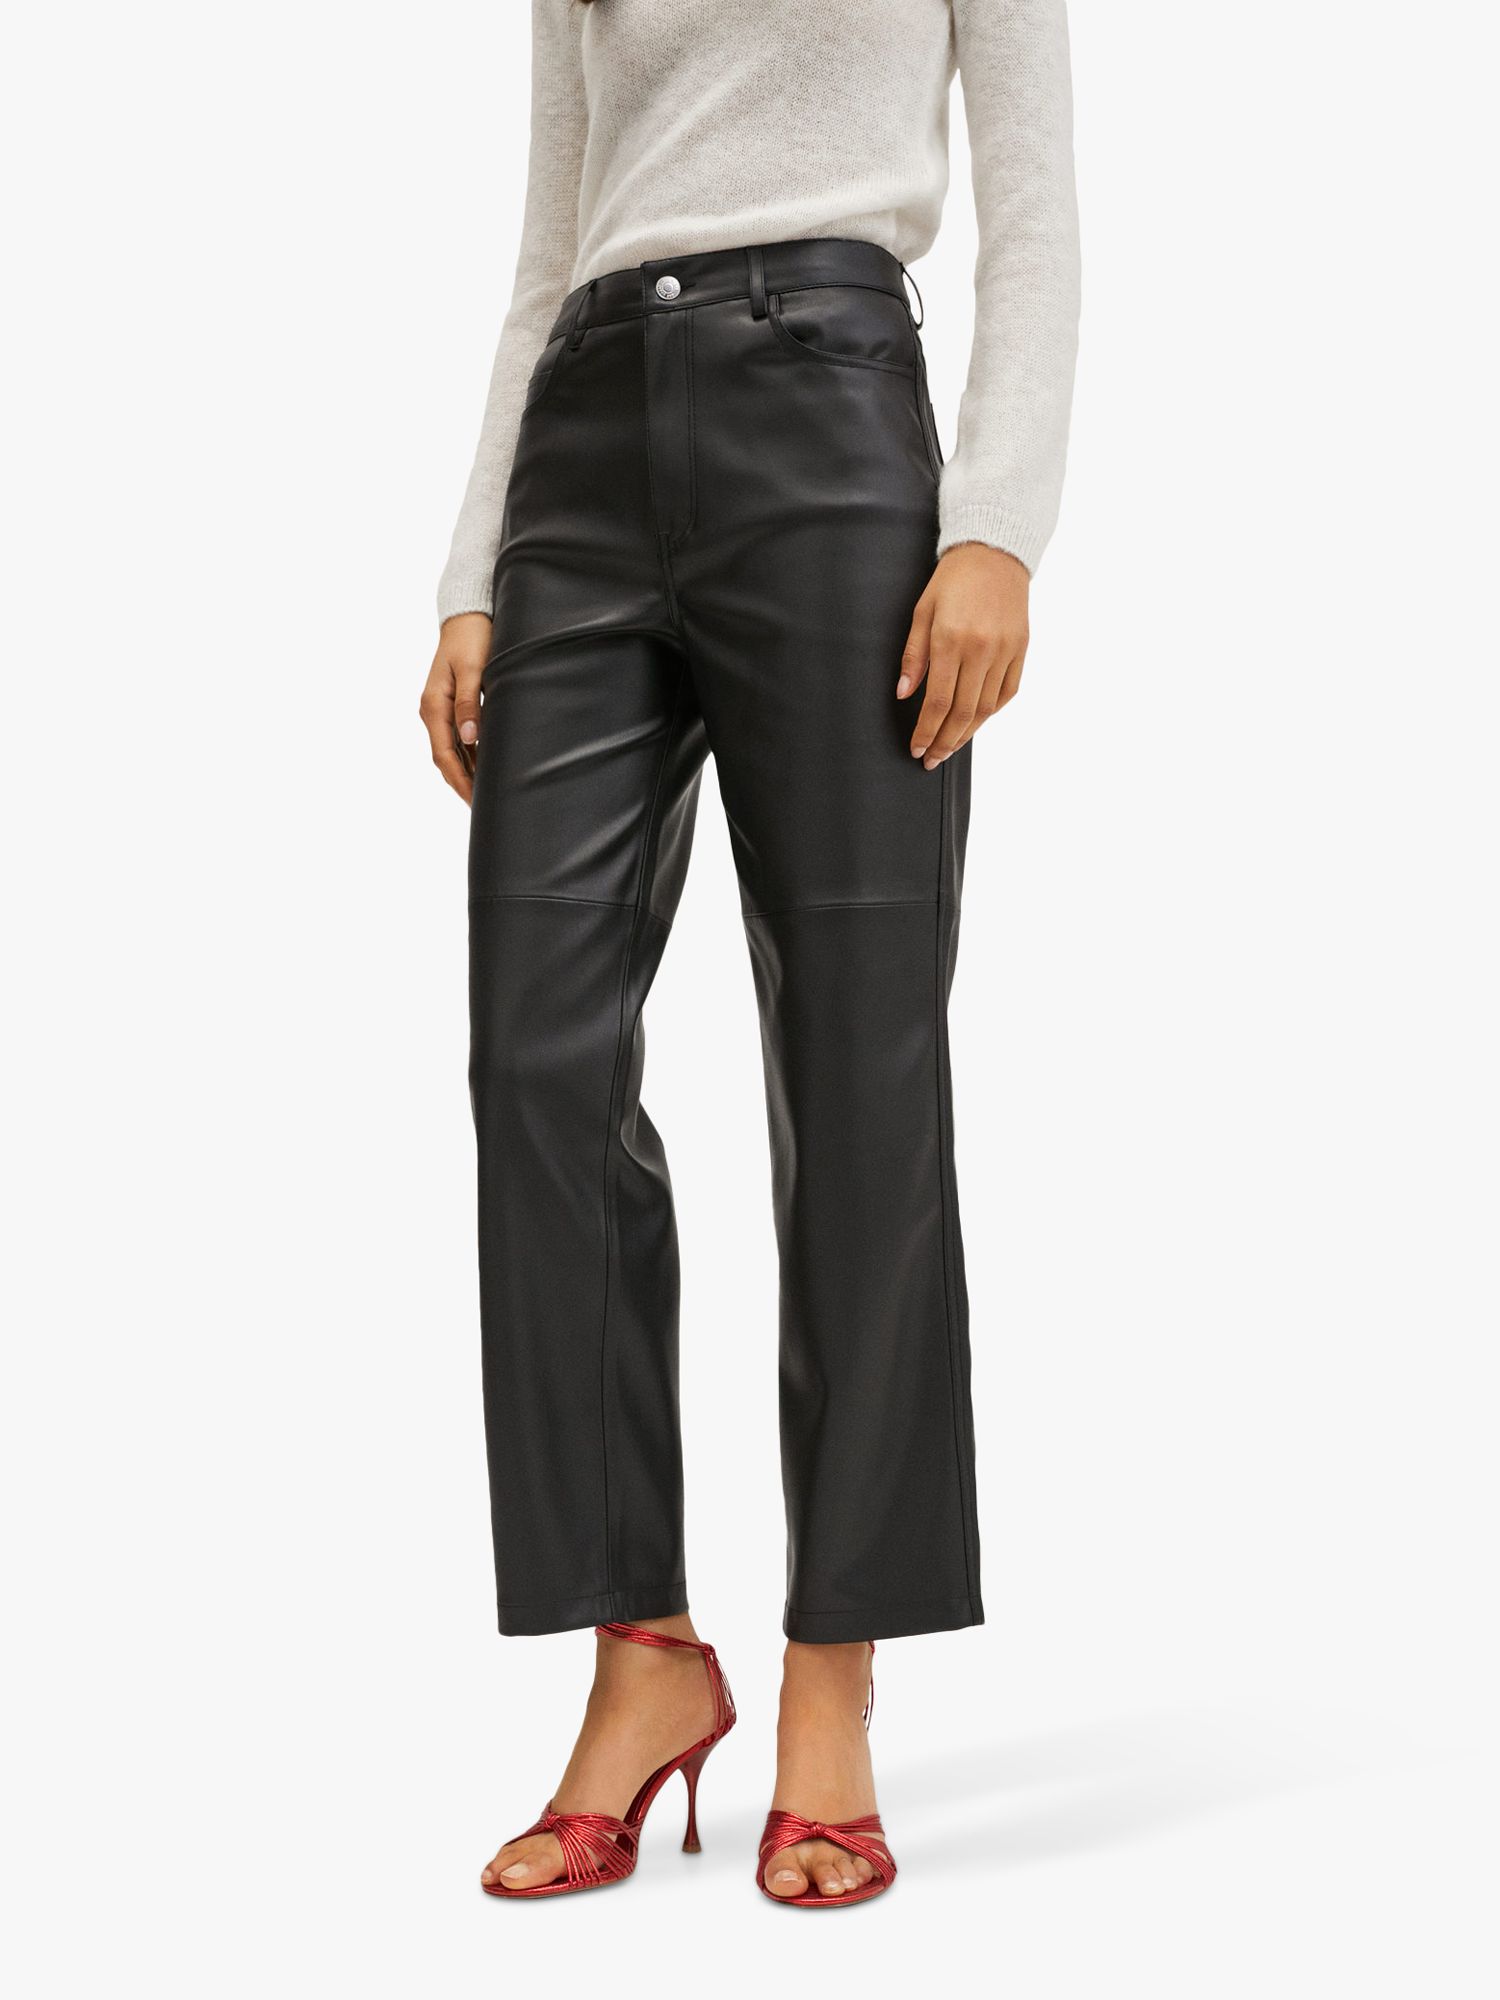 Mango Lille Faux Leather Trousers, Black